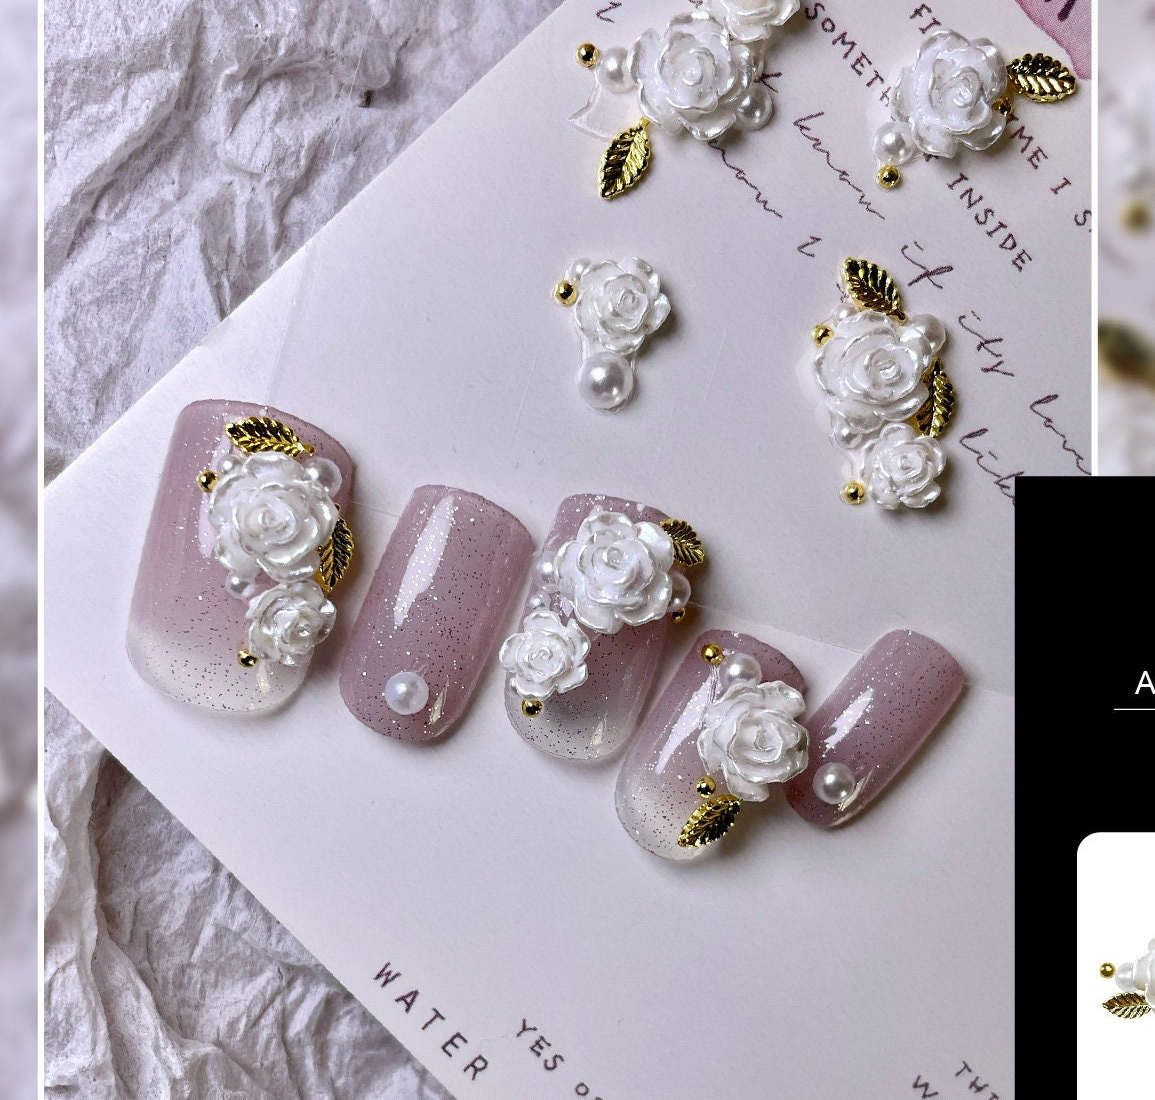 60pcs Colorful Rose Flower Nail Art Charms Nail Glitter Decals Decoration  4d Nail Flower Mixed Size Rose Design Acrylic Nail Stud Jewelry Salon Nail  A